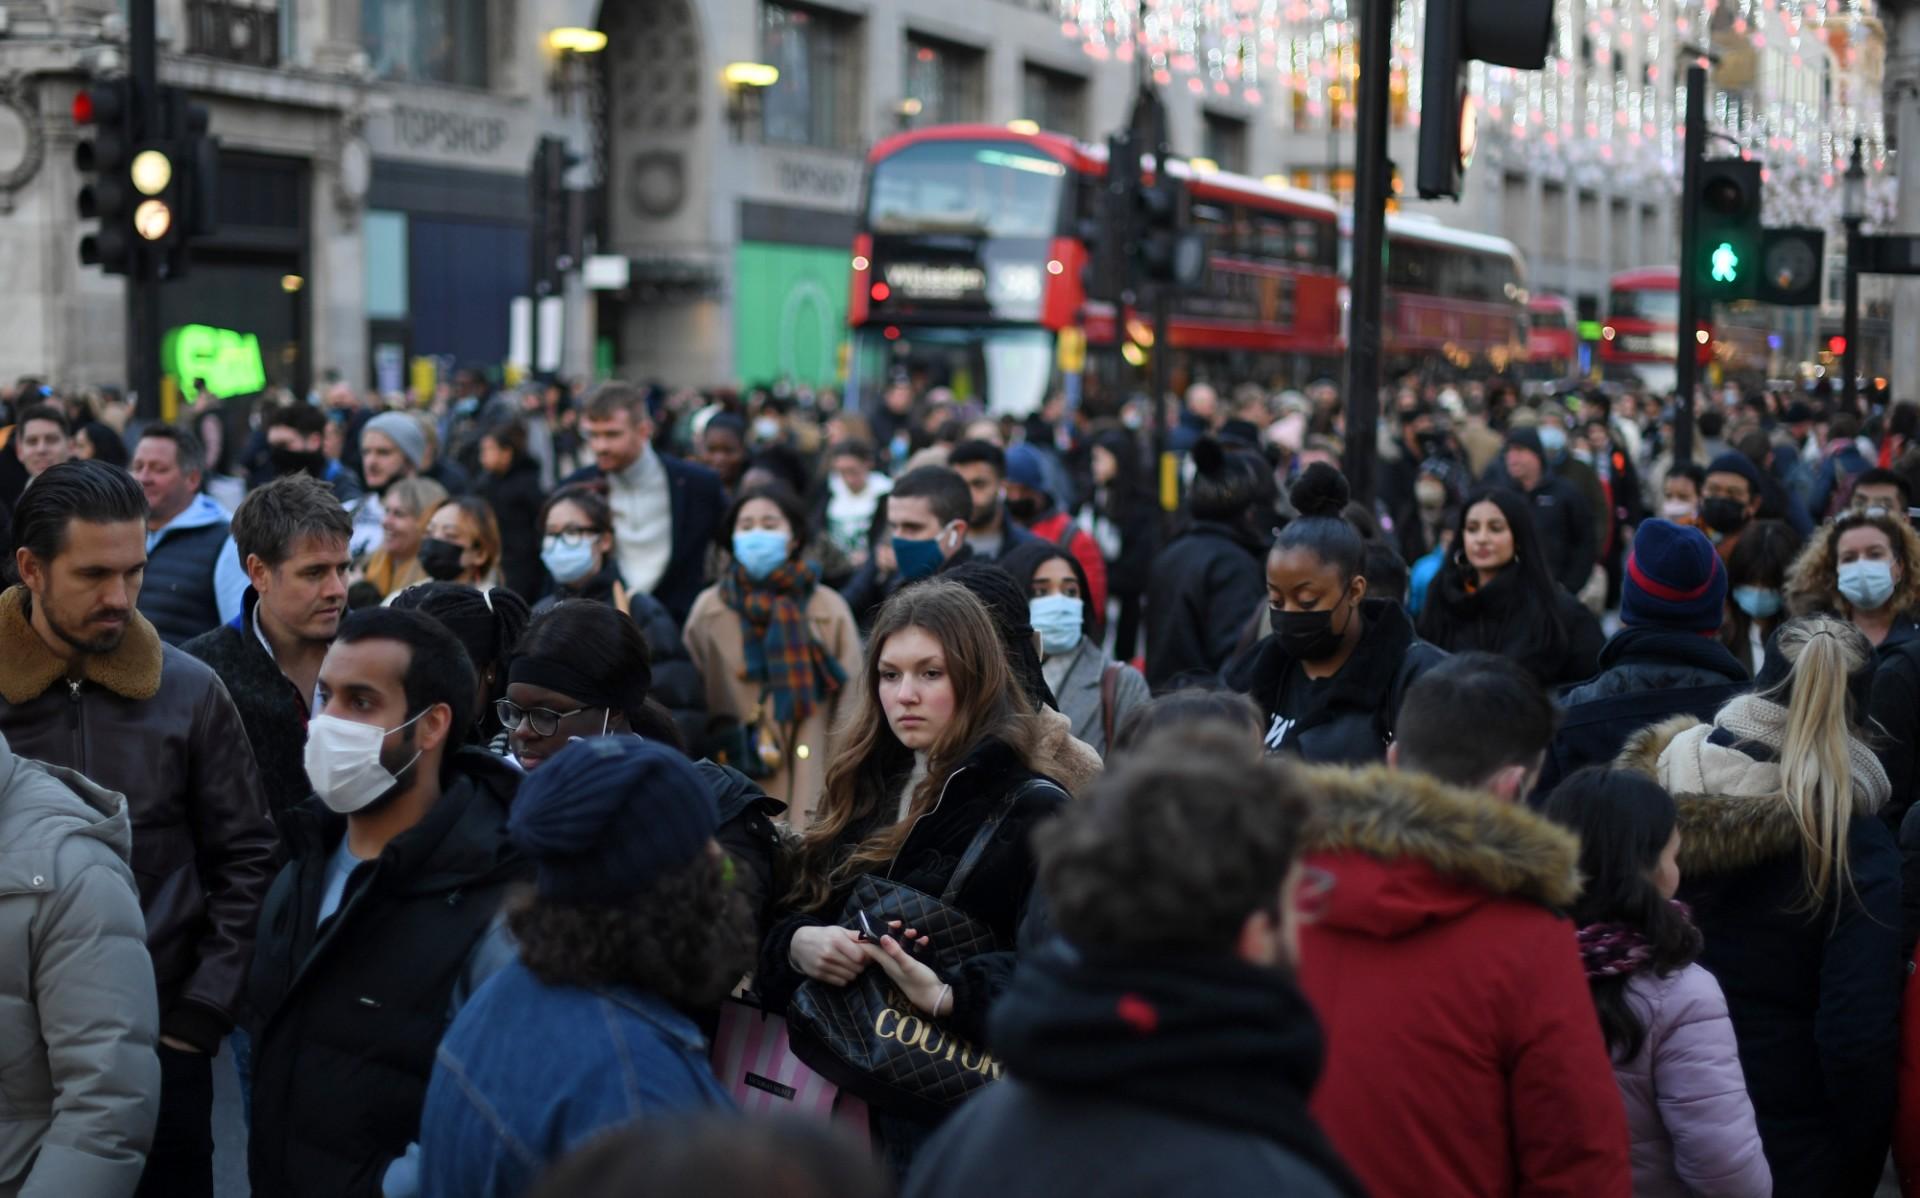 Shoppers, some wearing face masks, walk along Oxford Street in central London on Dec 4, as compulsory mask wearing in shops has been reintroduced in England as fears rise over the Omicron variant of Covid-19. Photo: AFP